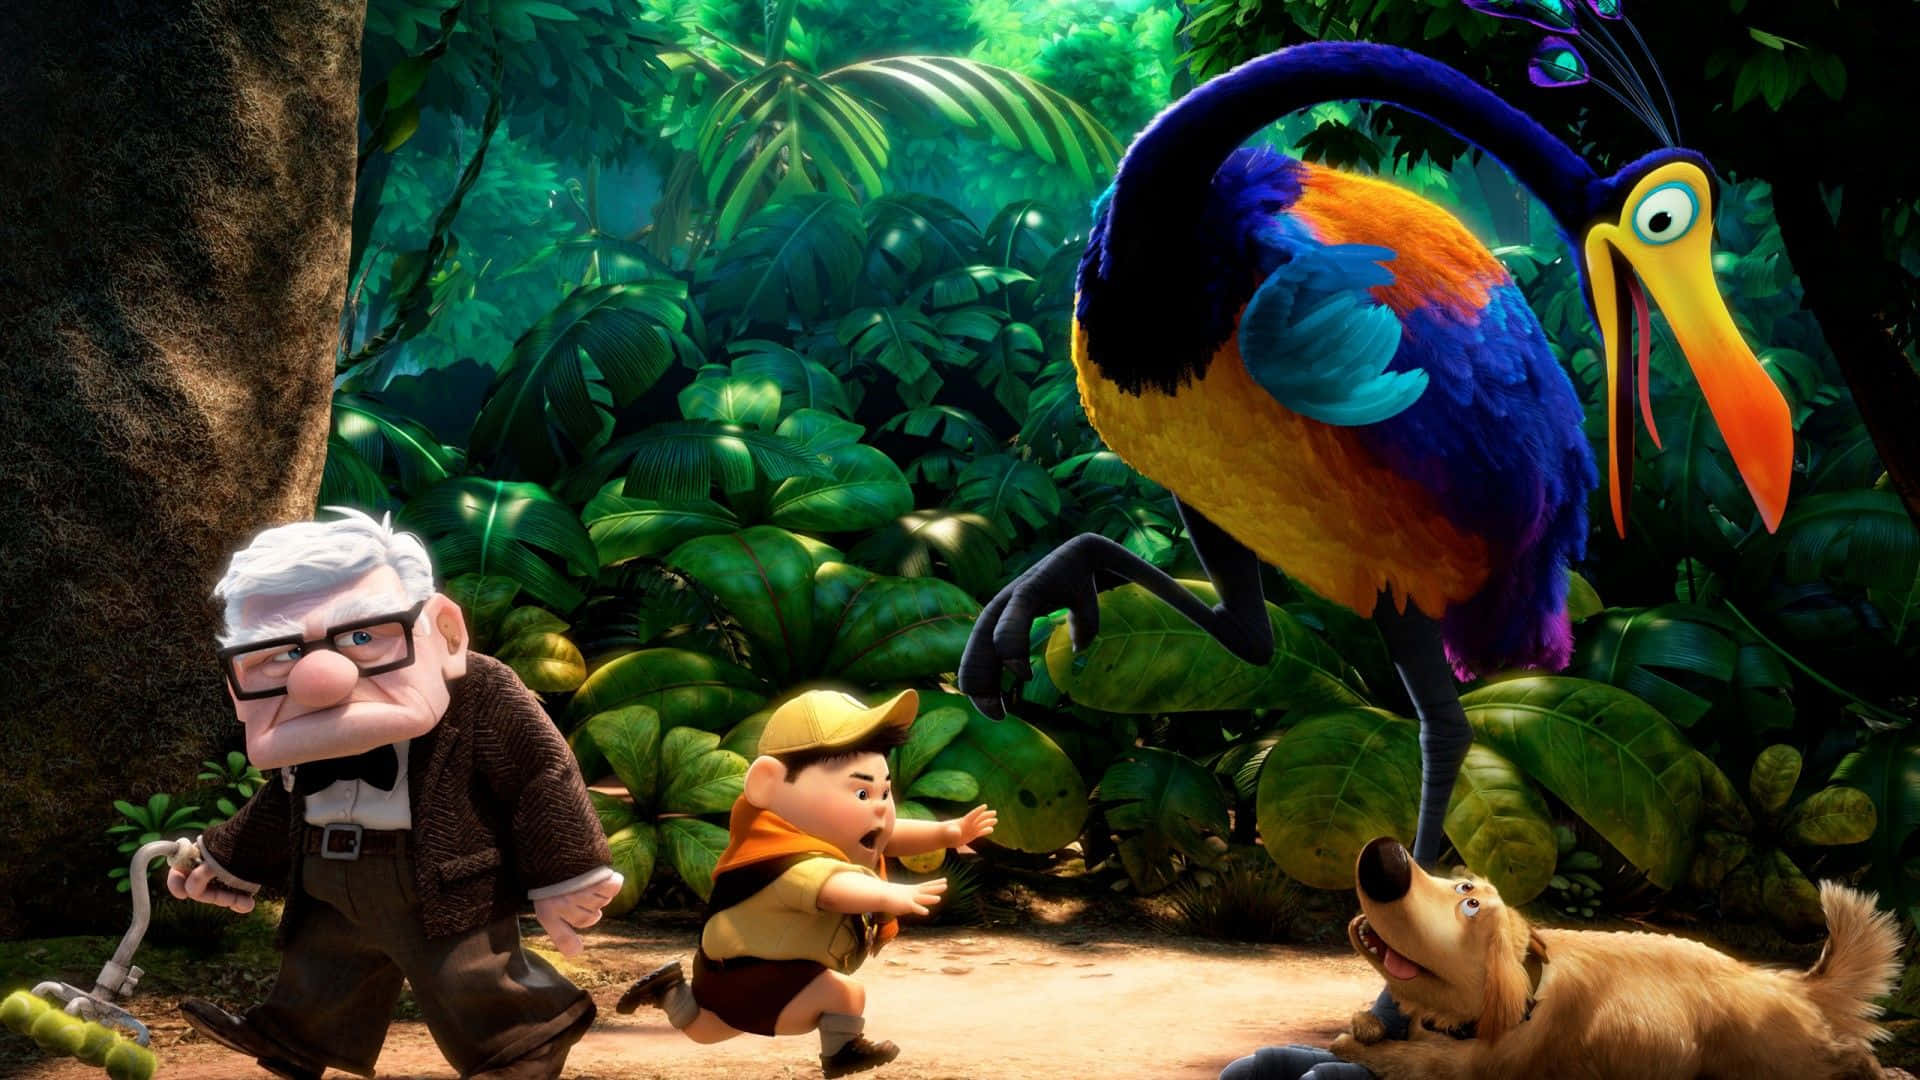 Russel Protecting Dug From Kevin In Up Movie Wallpaper